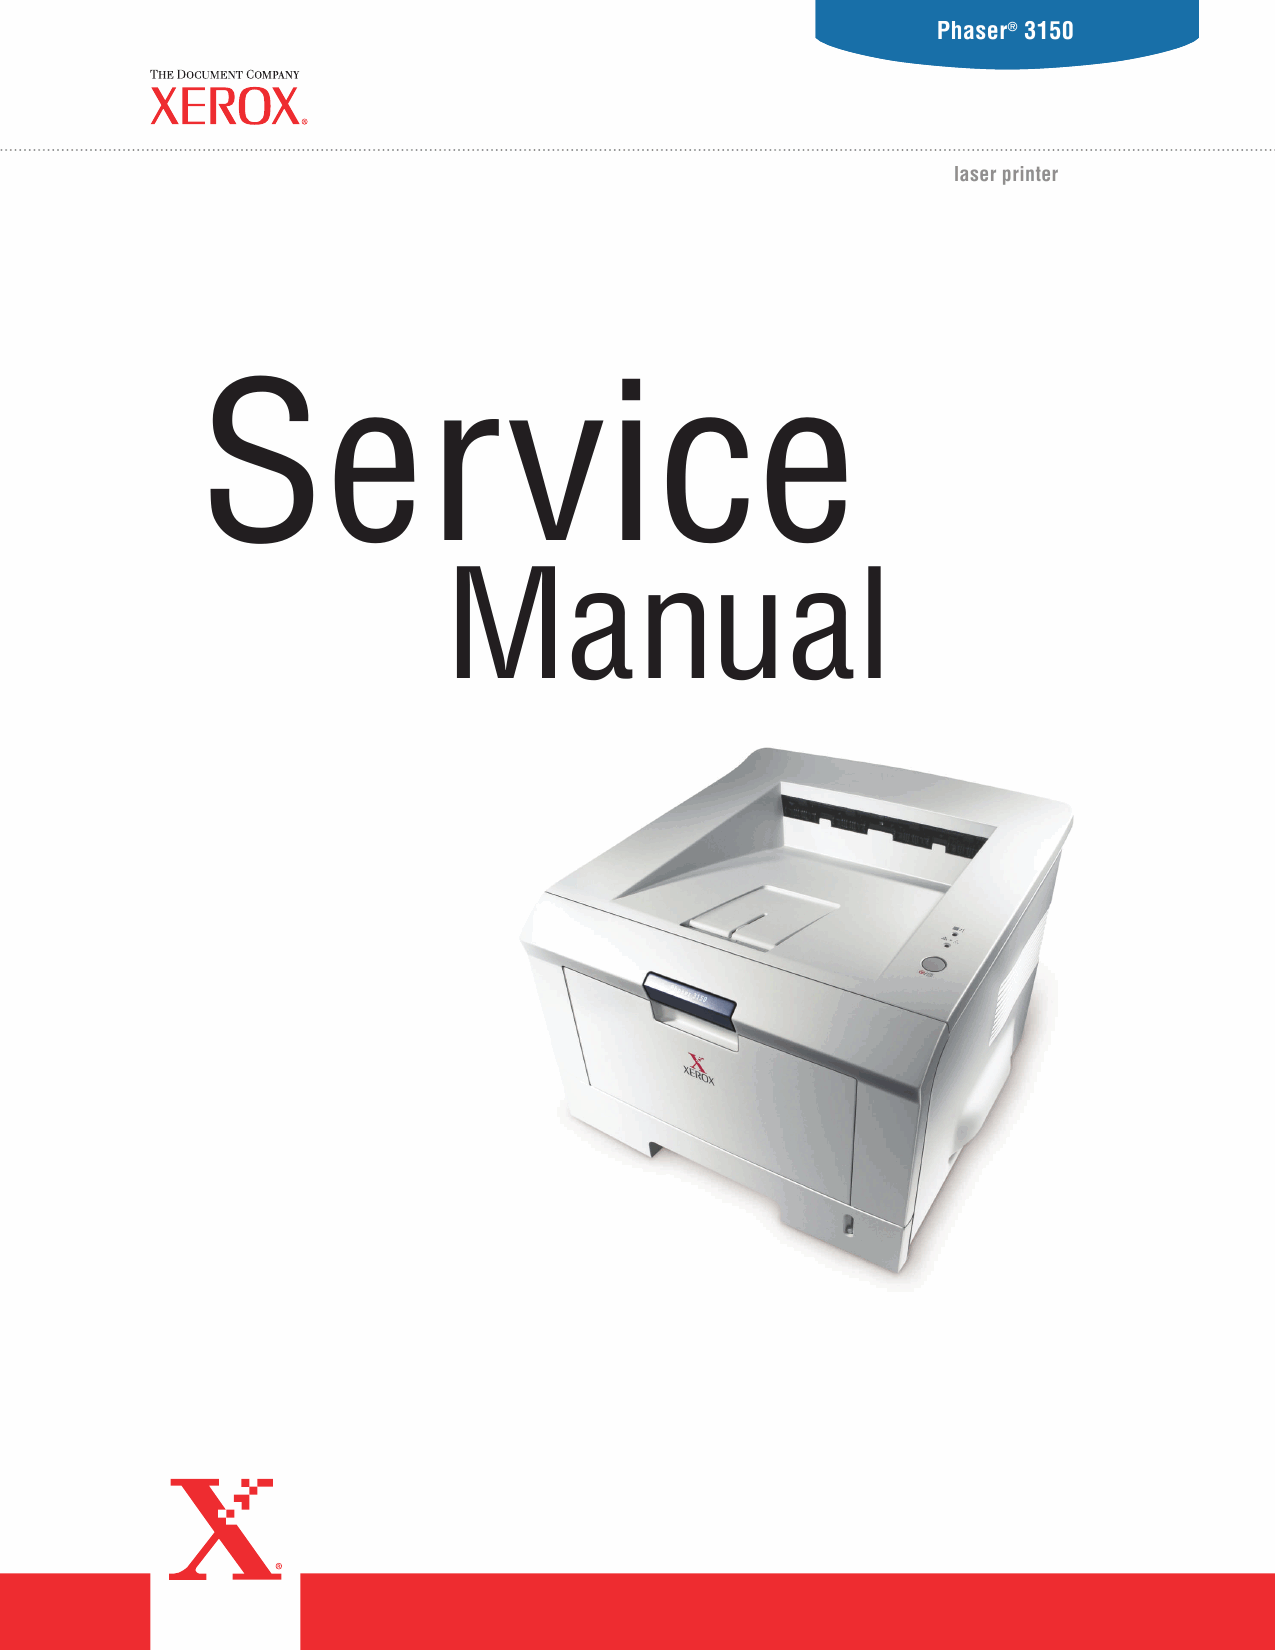 Xerox Phaser 3150 Parts List and Service Manual-1